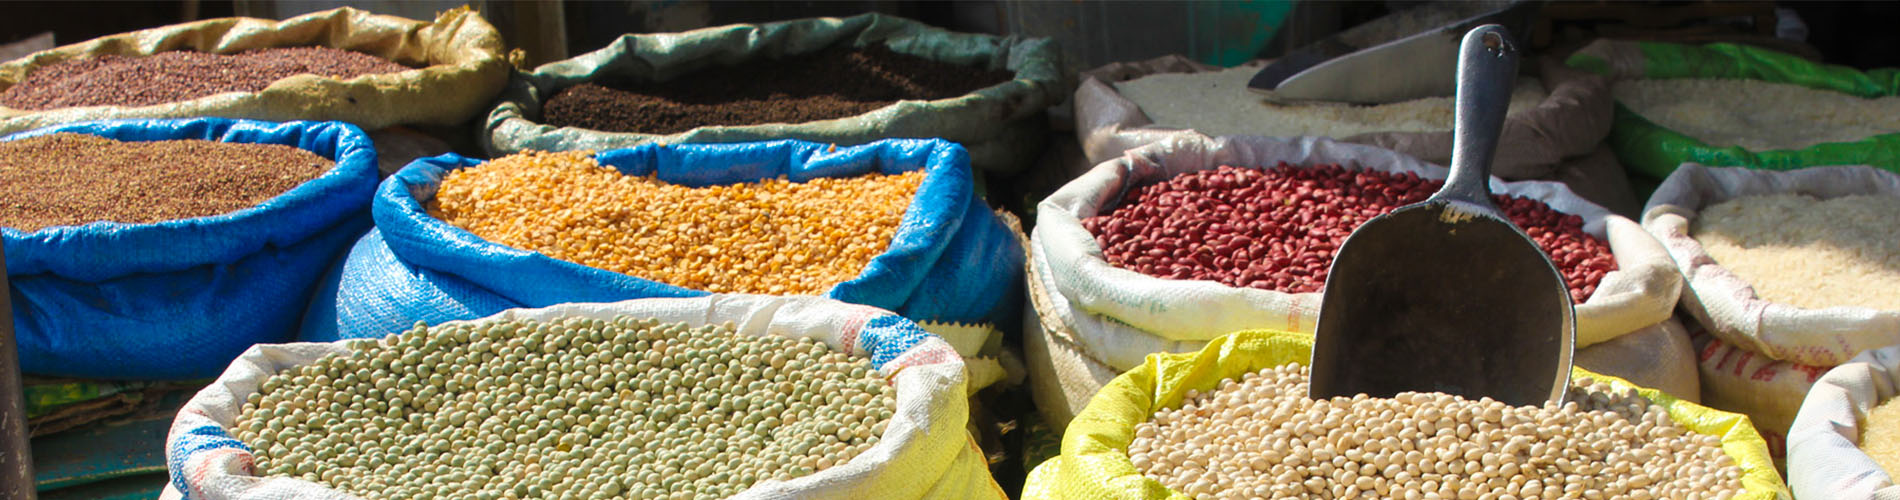 beans and grains of various types in bags